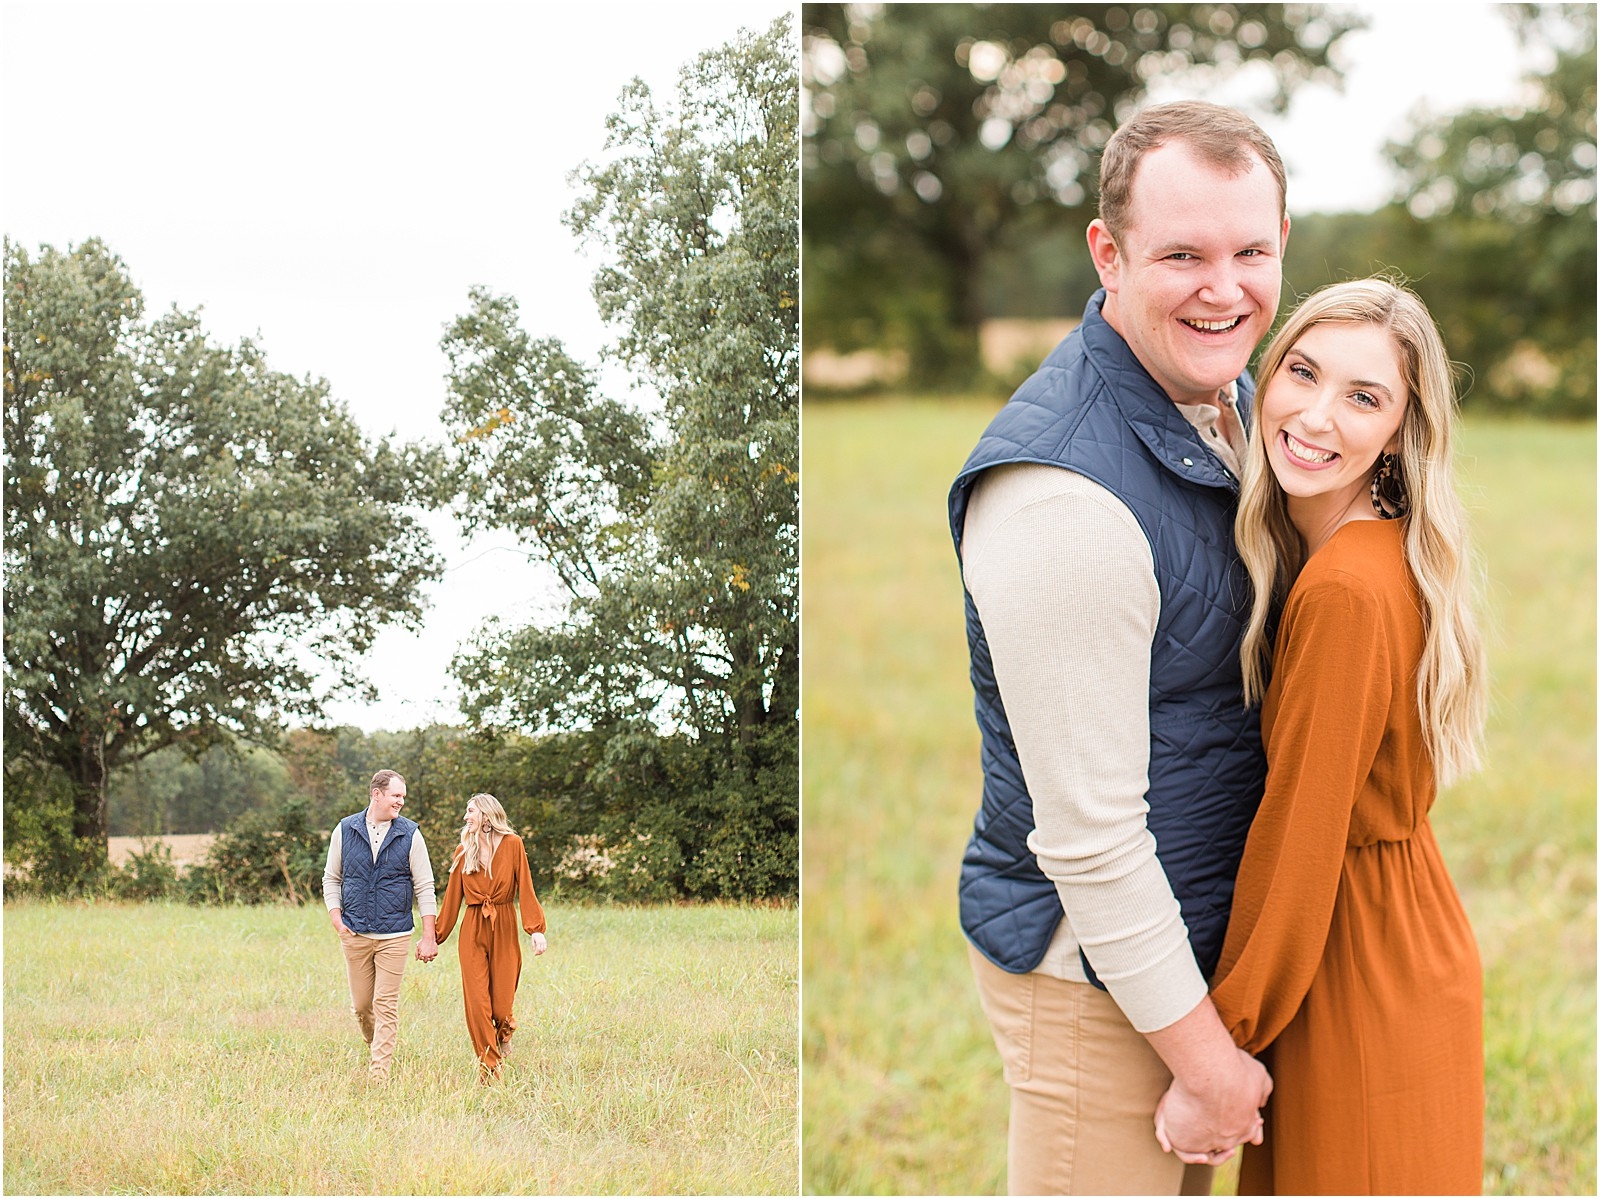 Kaitlyn and Andrew Engagement Session 0018.jpg